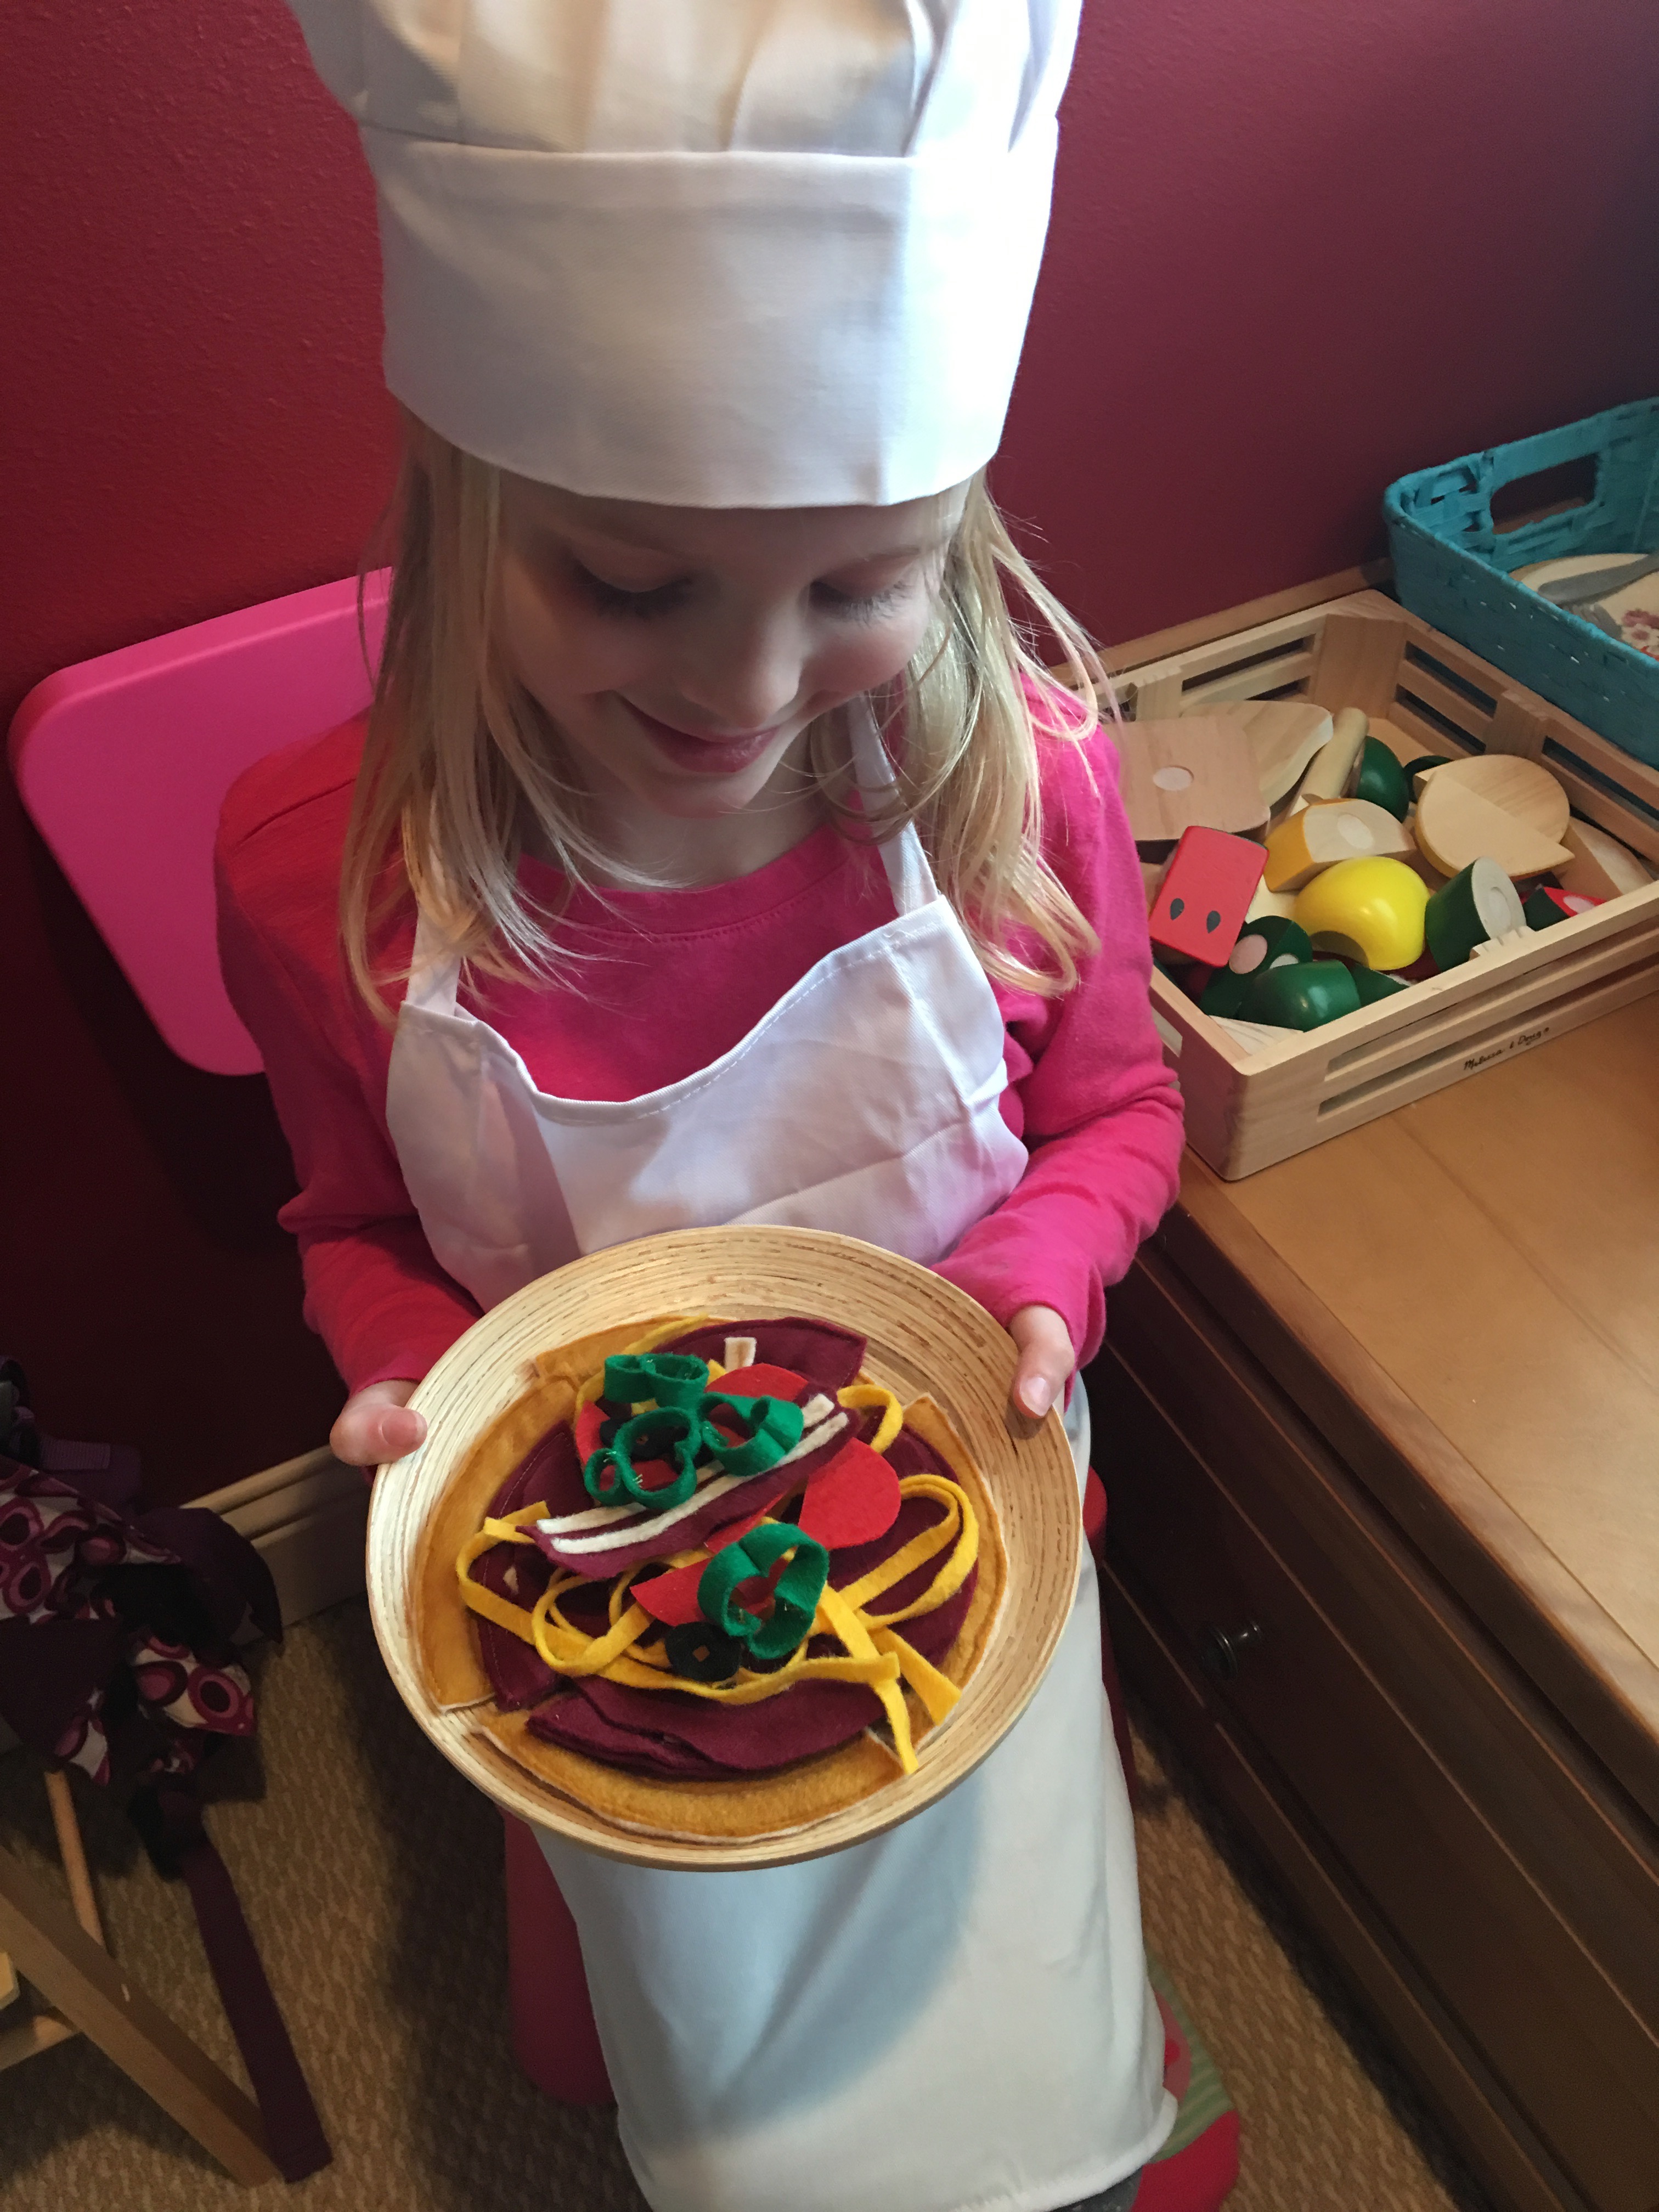 Pizza Dramatic Play: It's great to get the kids involved in cooking for real in the kitchen but replicating some of the food items for dramatic play, allows them to continue to act out what they're learning in a safe and fun environment